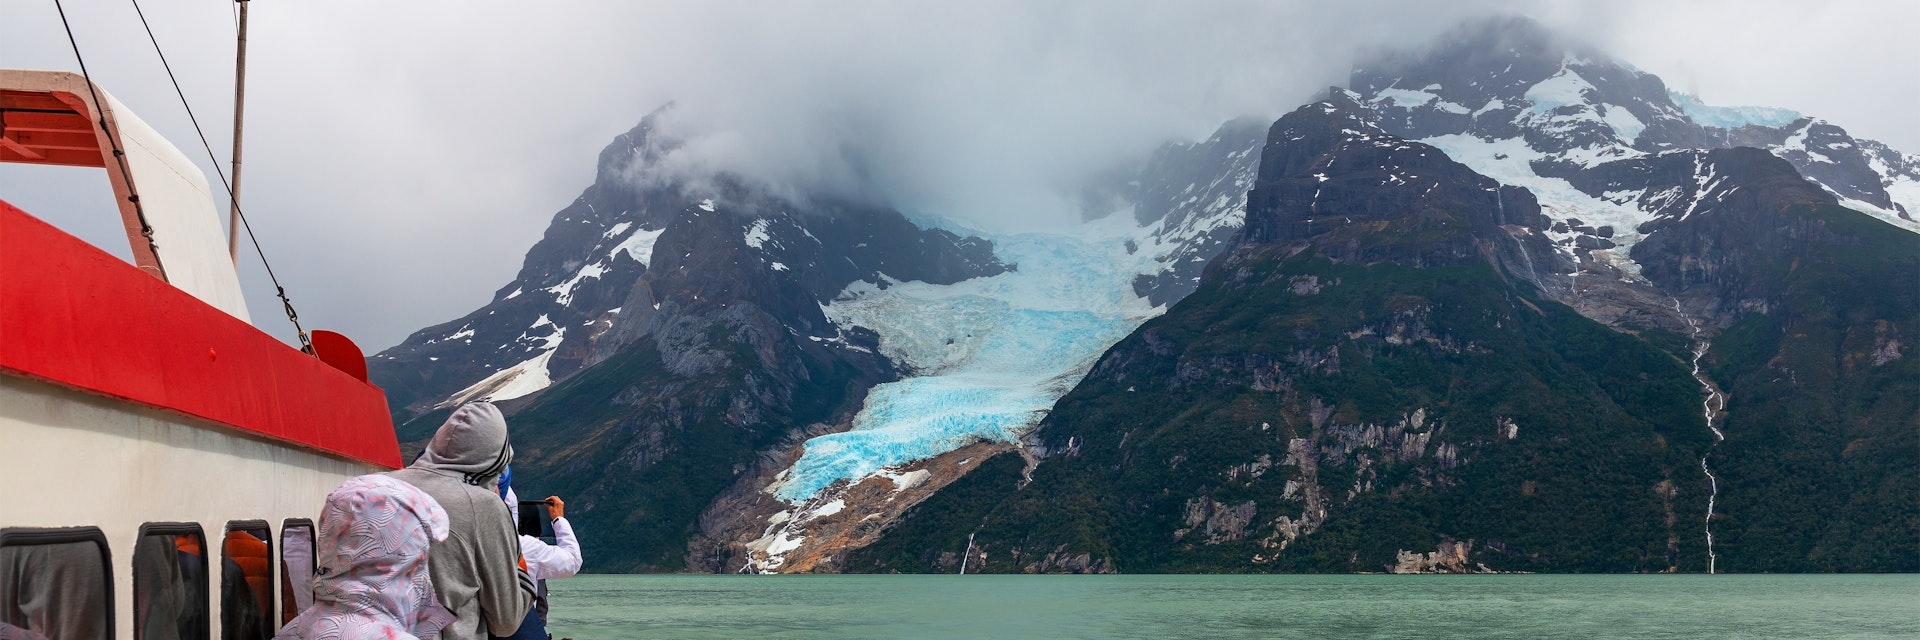 Tourists on a exploration cruise approaching the Balmaceda glacier on the Last Hope Sound, Bernardo O Higgins National Park, Patagonia, Chile.